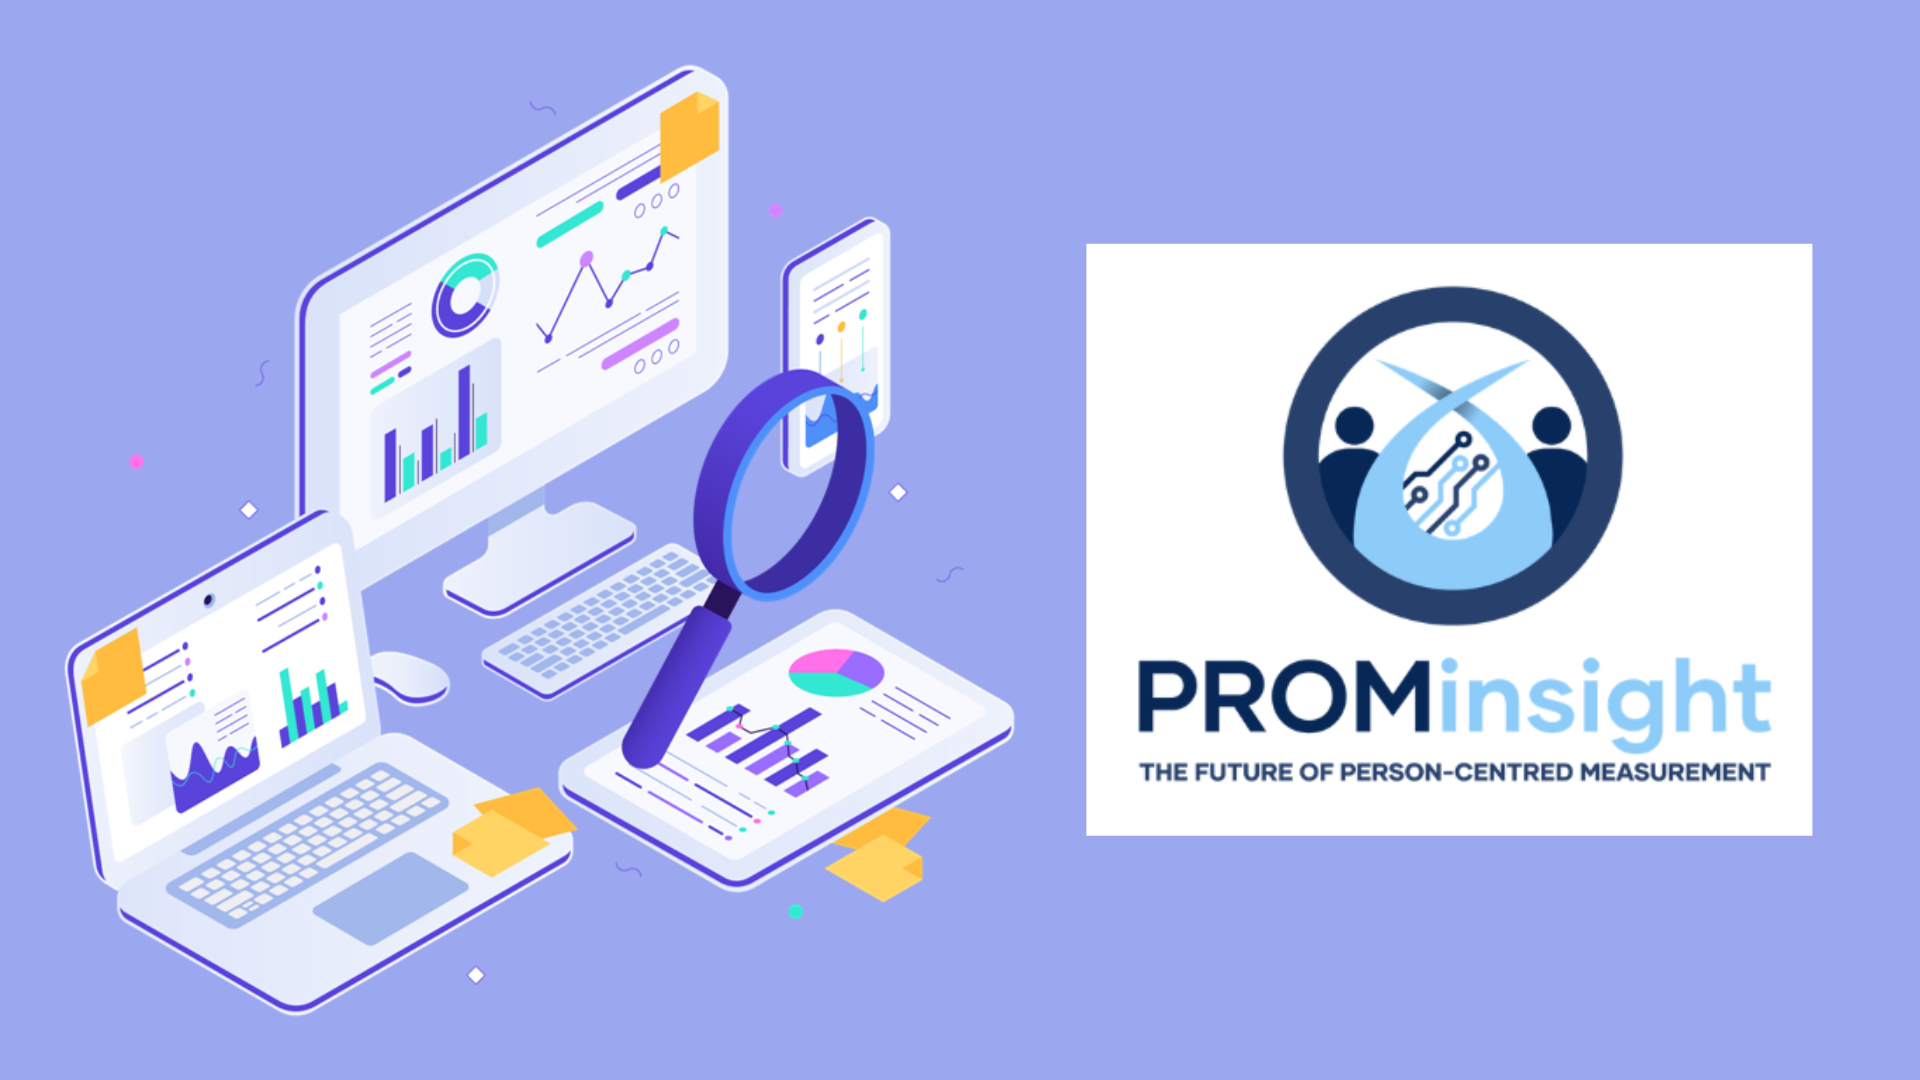 PROMinsight: The Comprehensive Platform for Precise Patient-Reported Outcome Measures